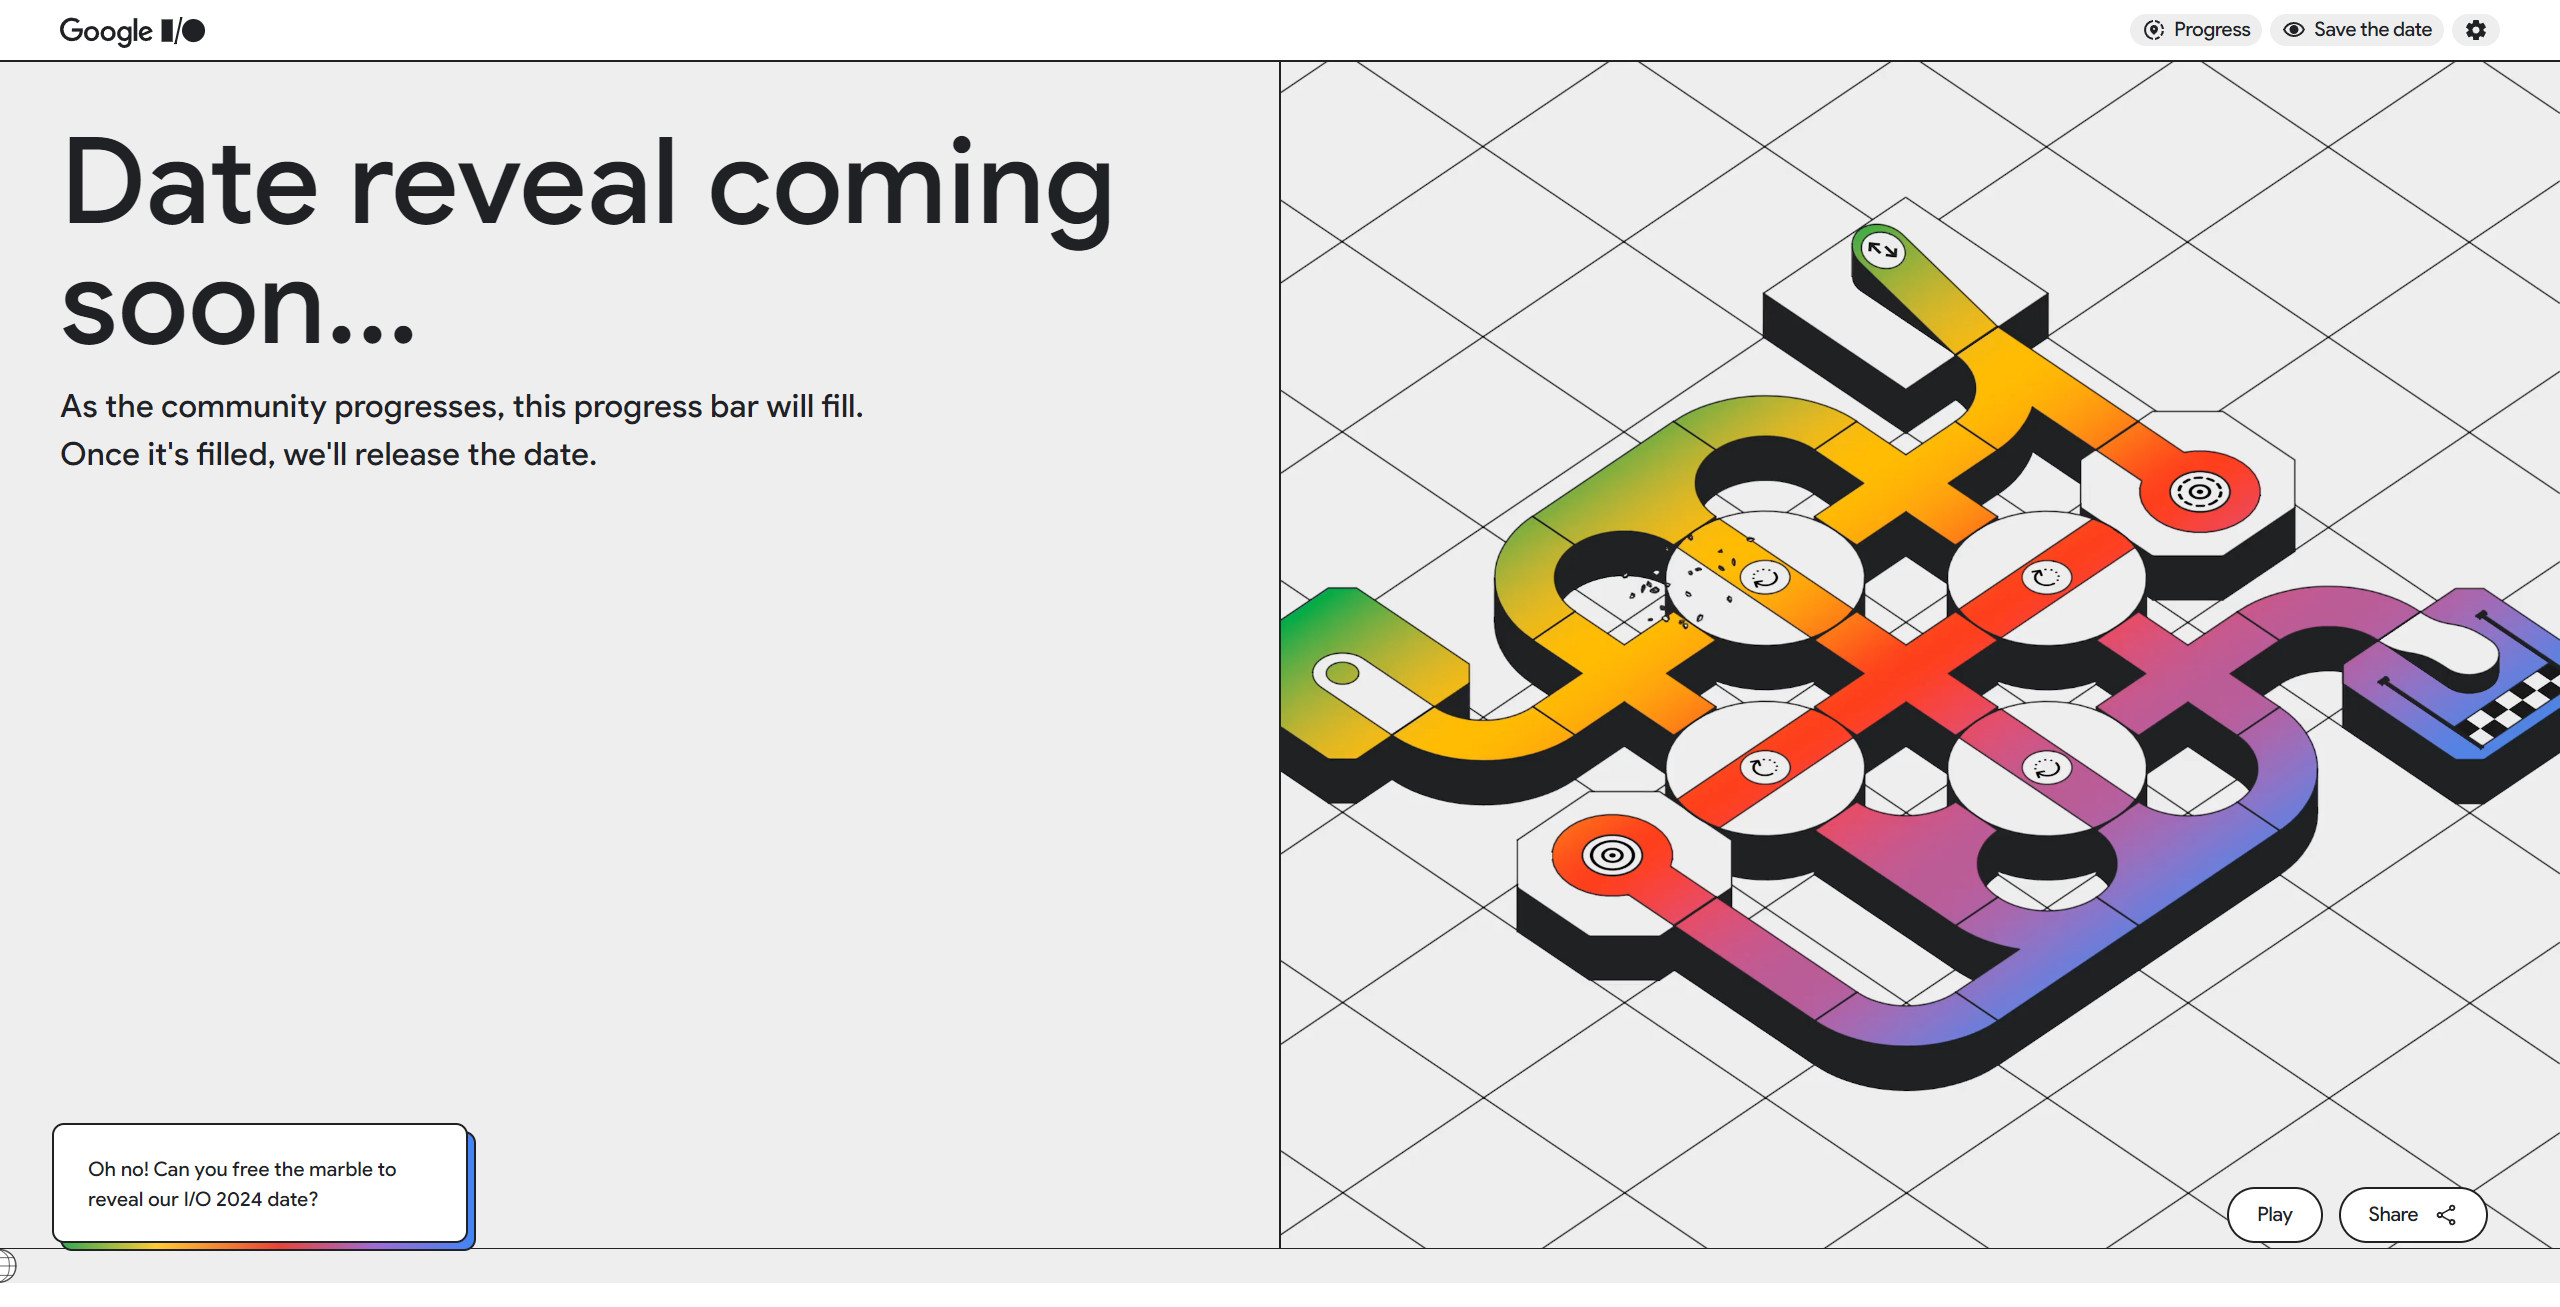 Google’s annual I/O puzzle is back.